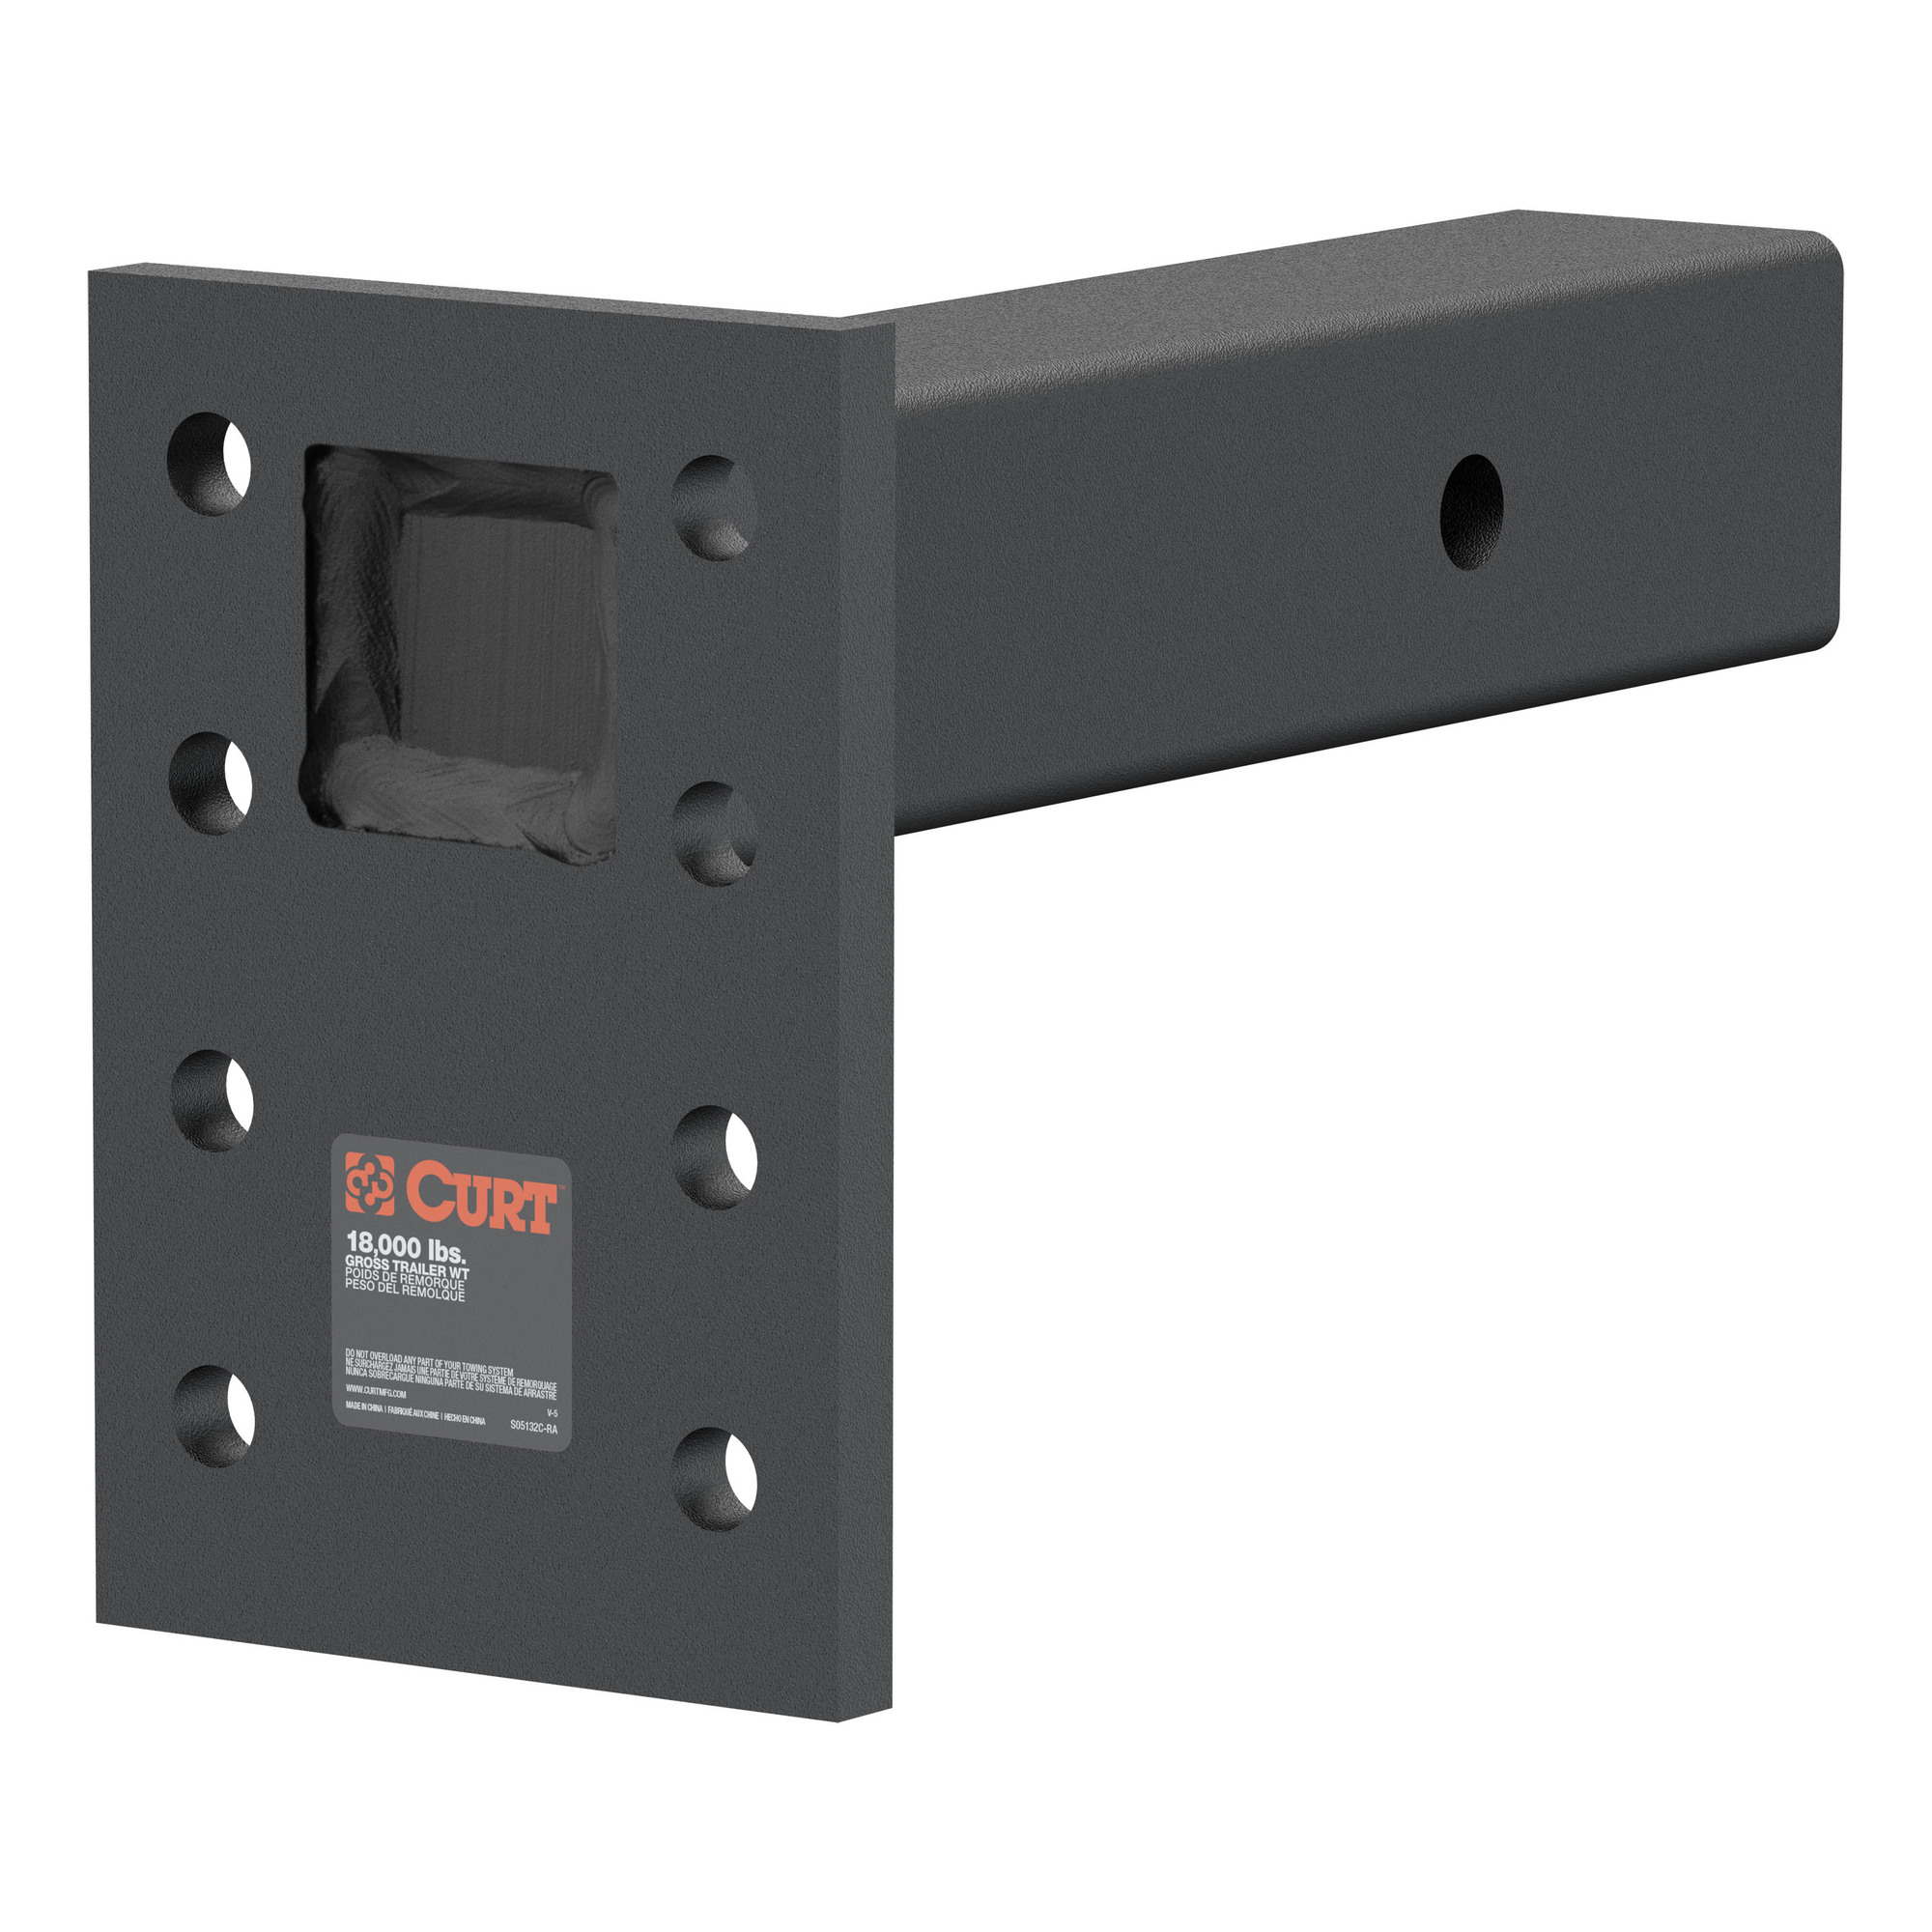 Curt Manufacturing Adjustable Trailer Hitch Pintle Mount, 7Inch Plate Height, Solid Steel, 18,000lb. Capacity, Model 48329